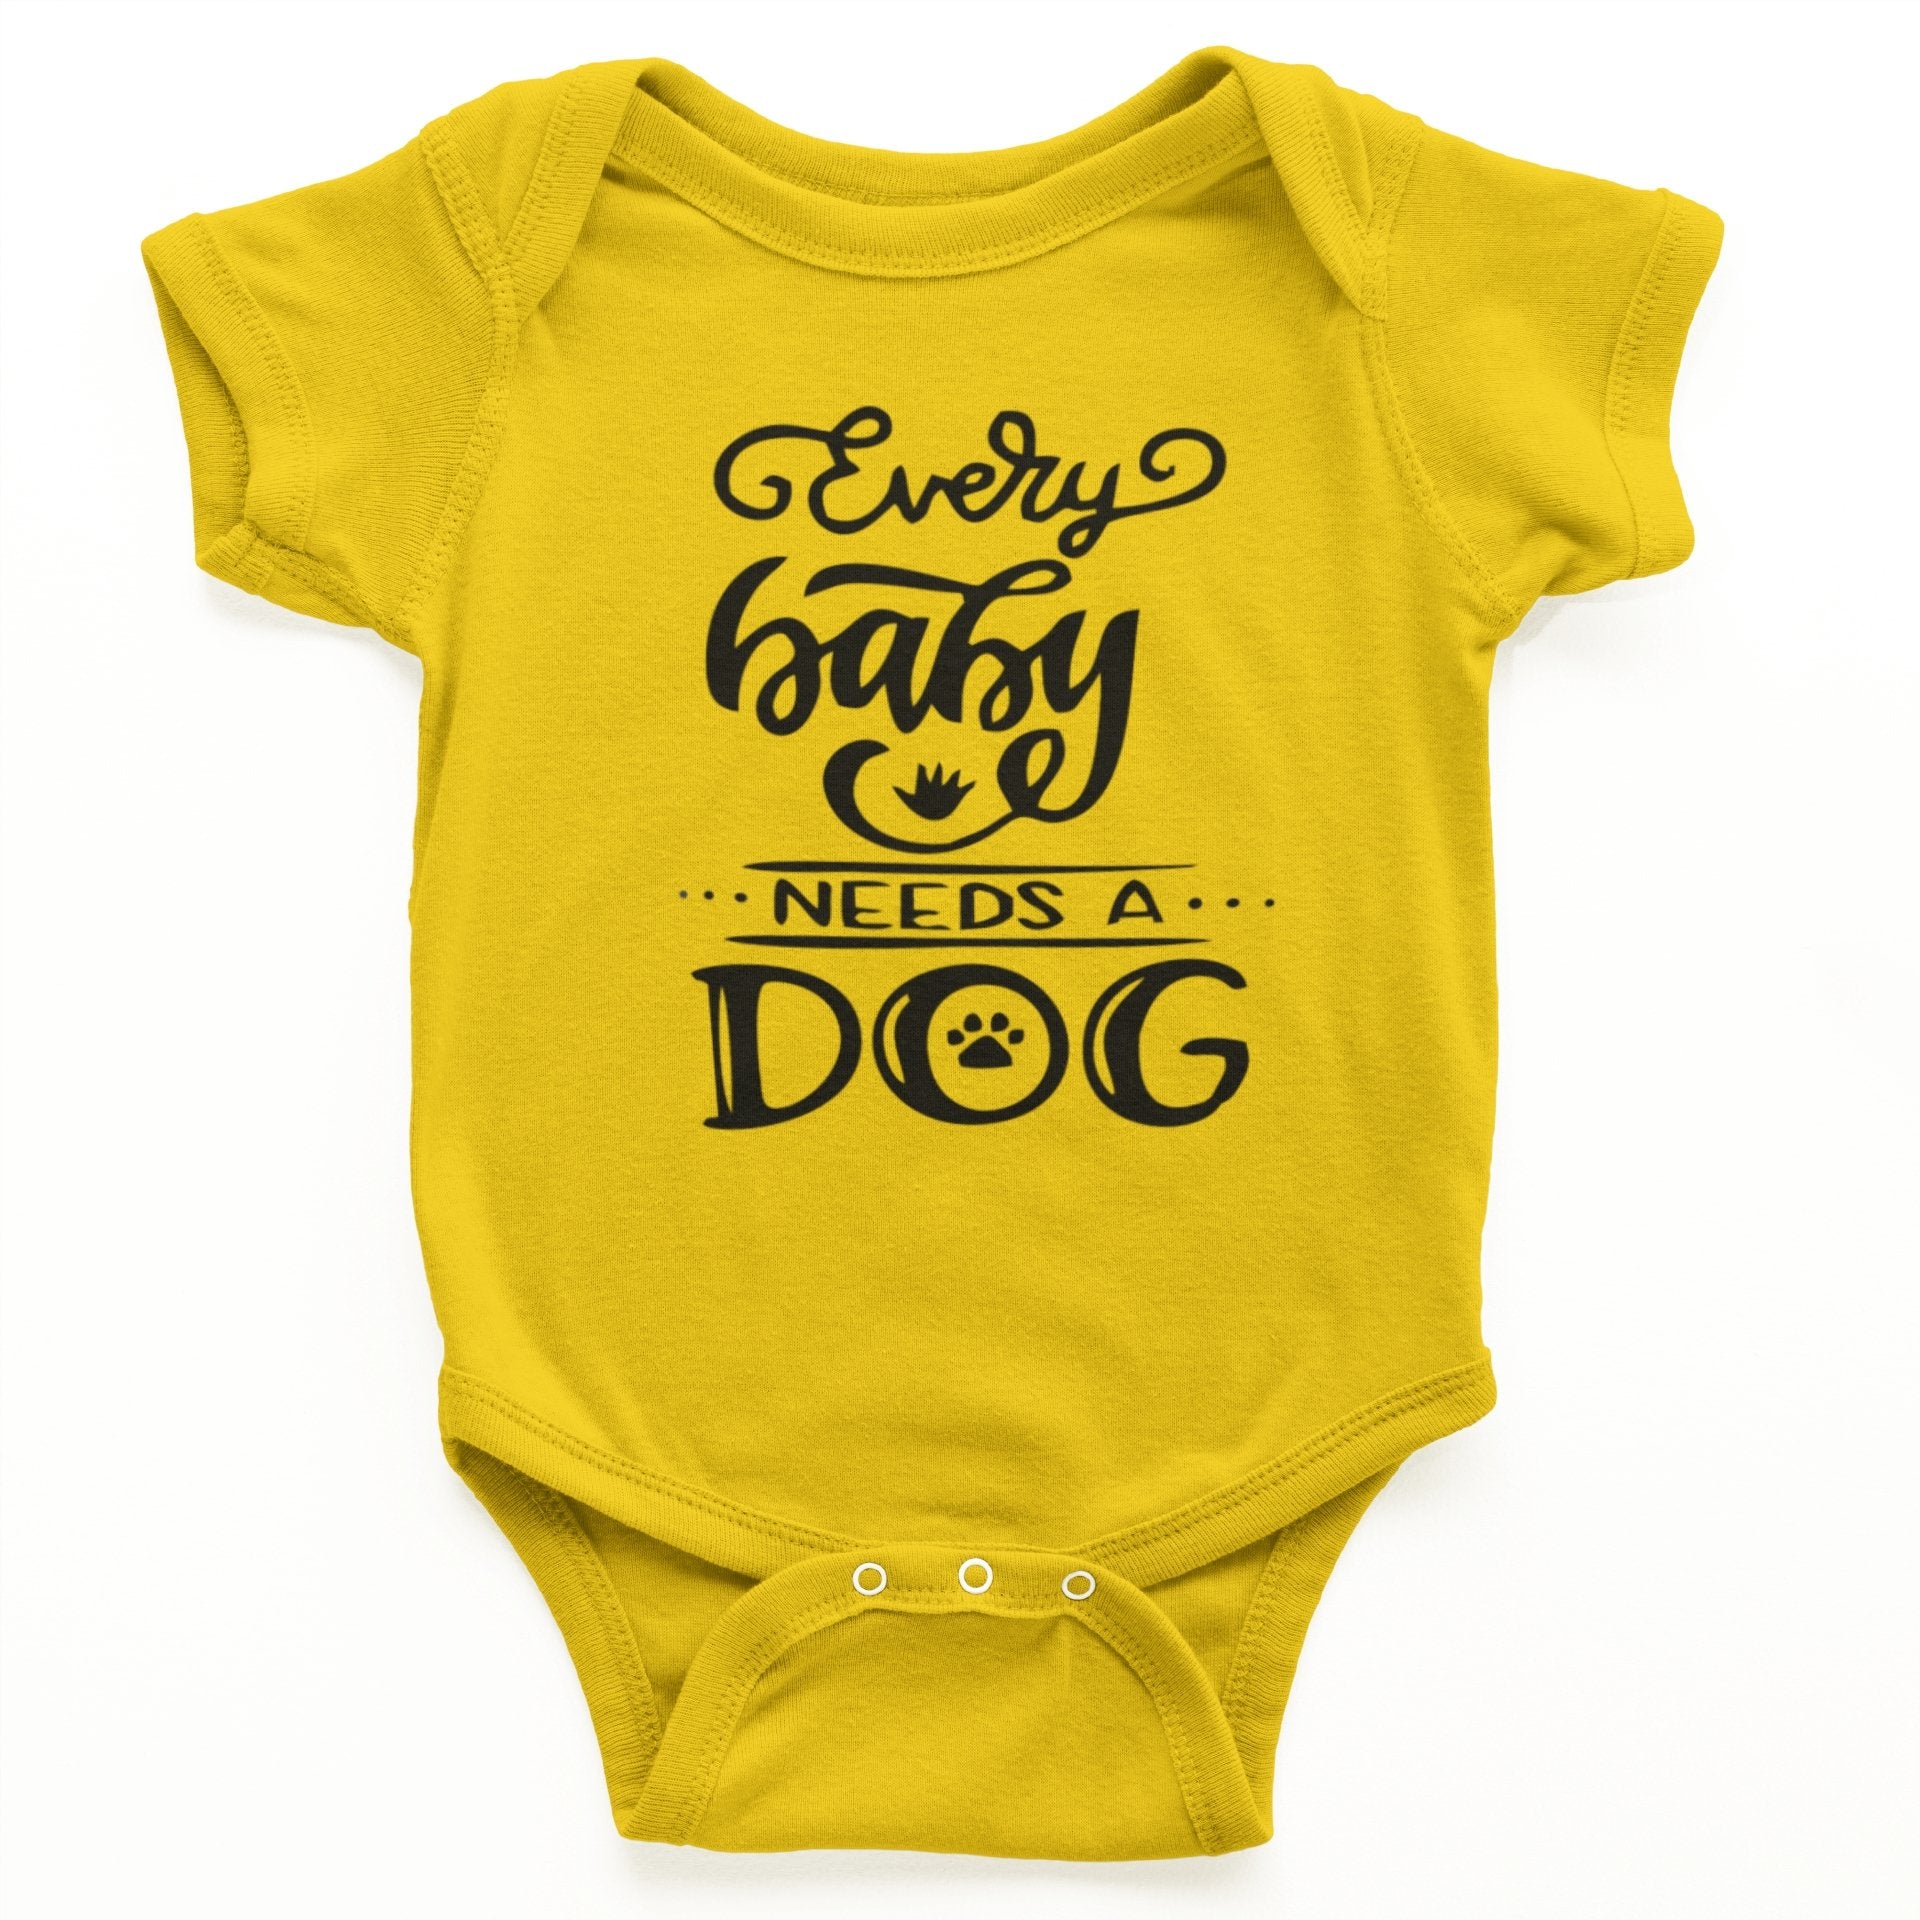 thelegalgang,Every baby needs a Dog Onesies for Babies,.